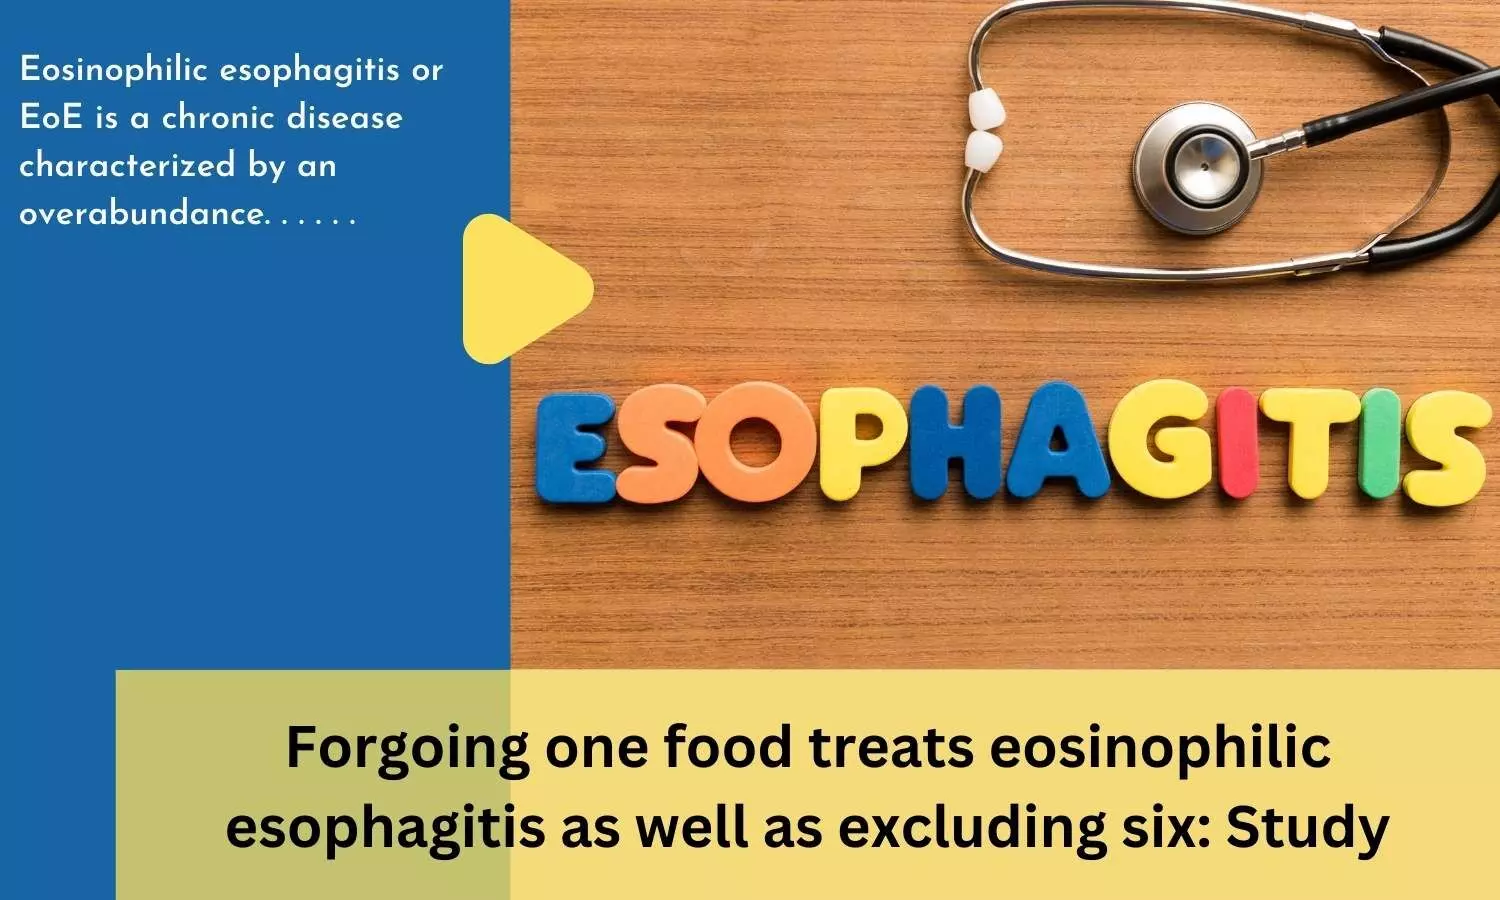 Forgoing one food treats eosinophilic esophagitis as well as excluding six: Study